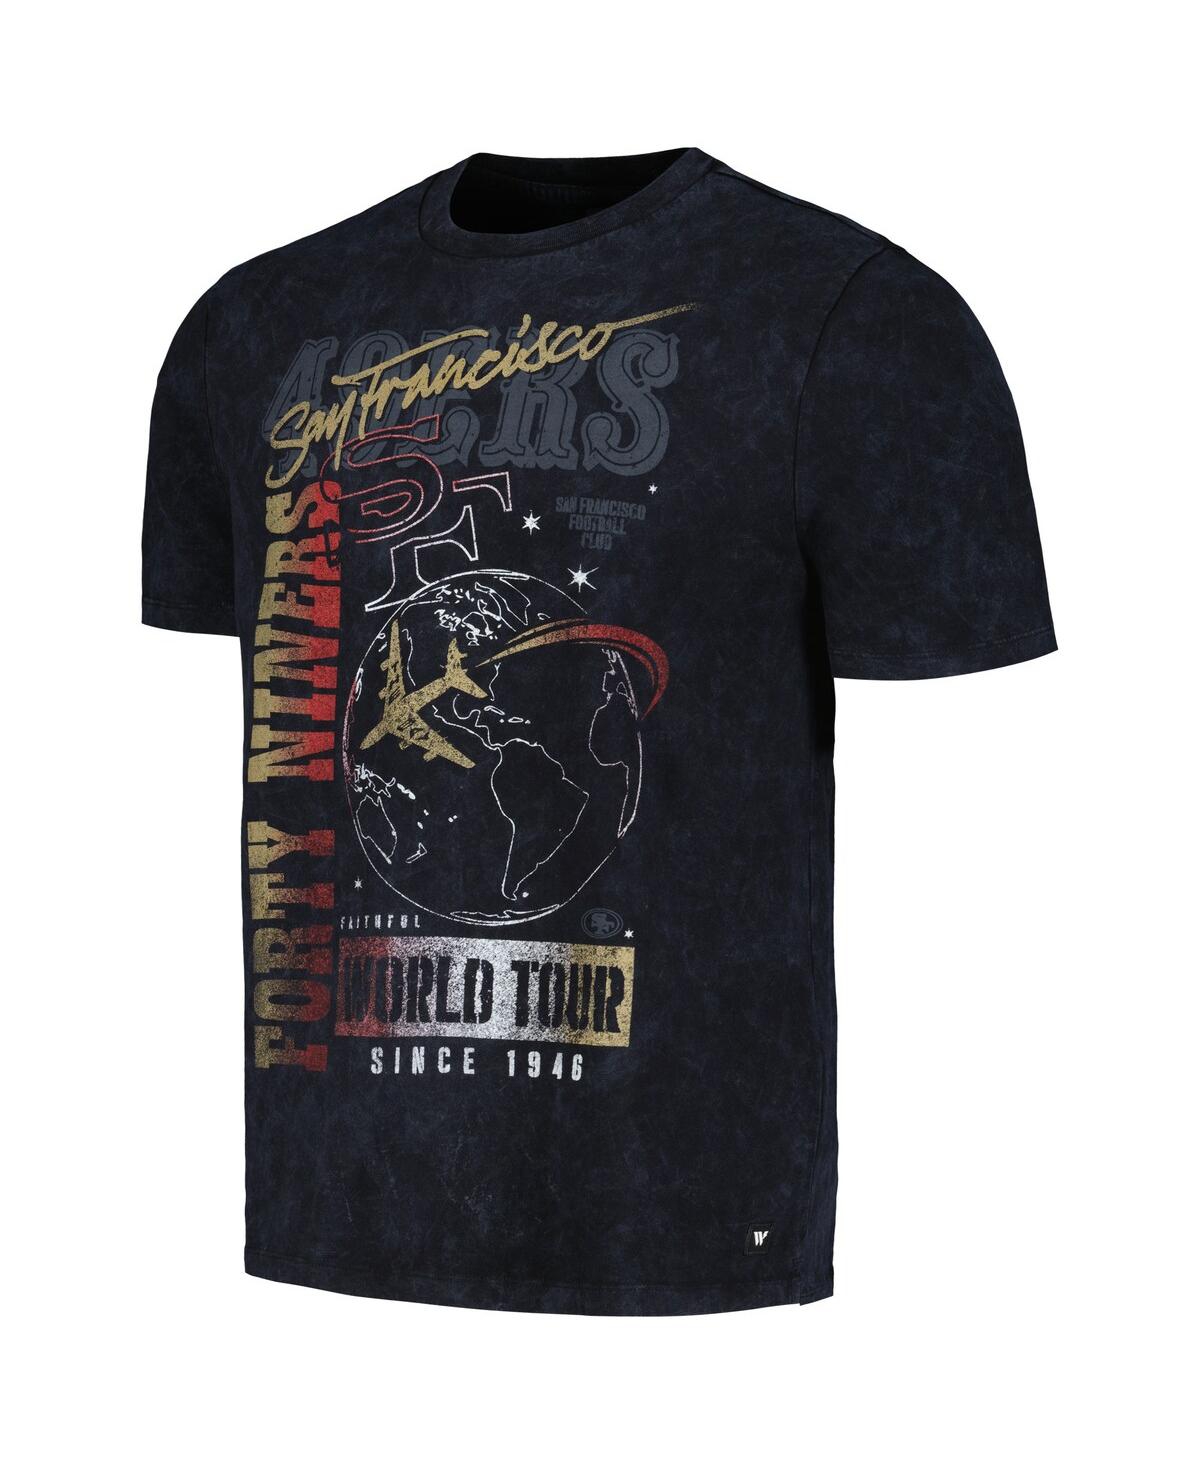 Shop The Wild Collective Men's And Women's  Black Distressed San Francisco 49ers Tour Band T-shirt